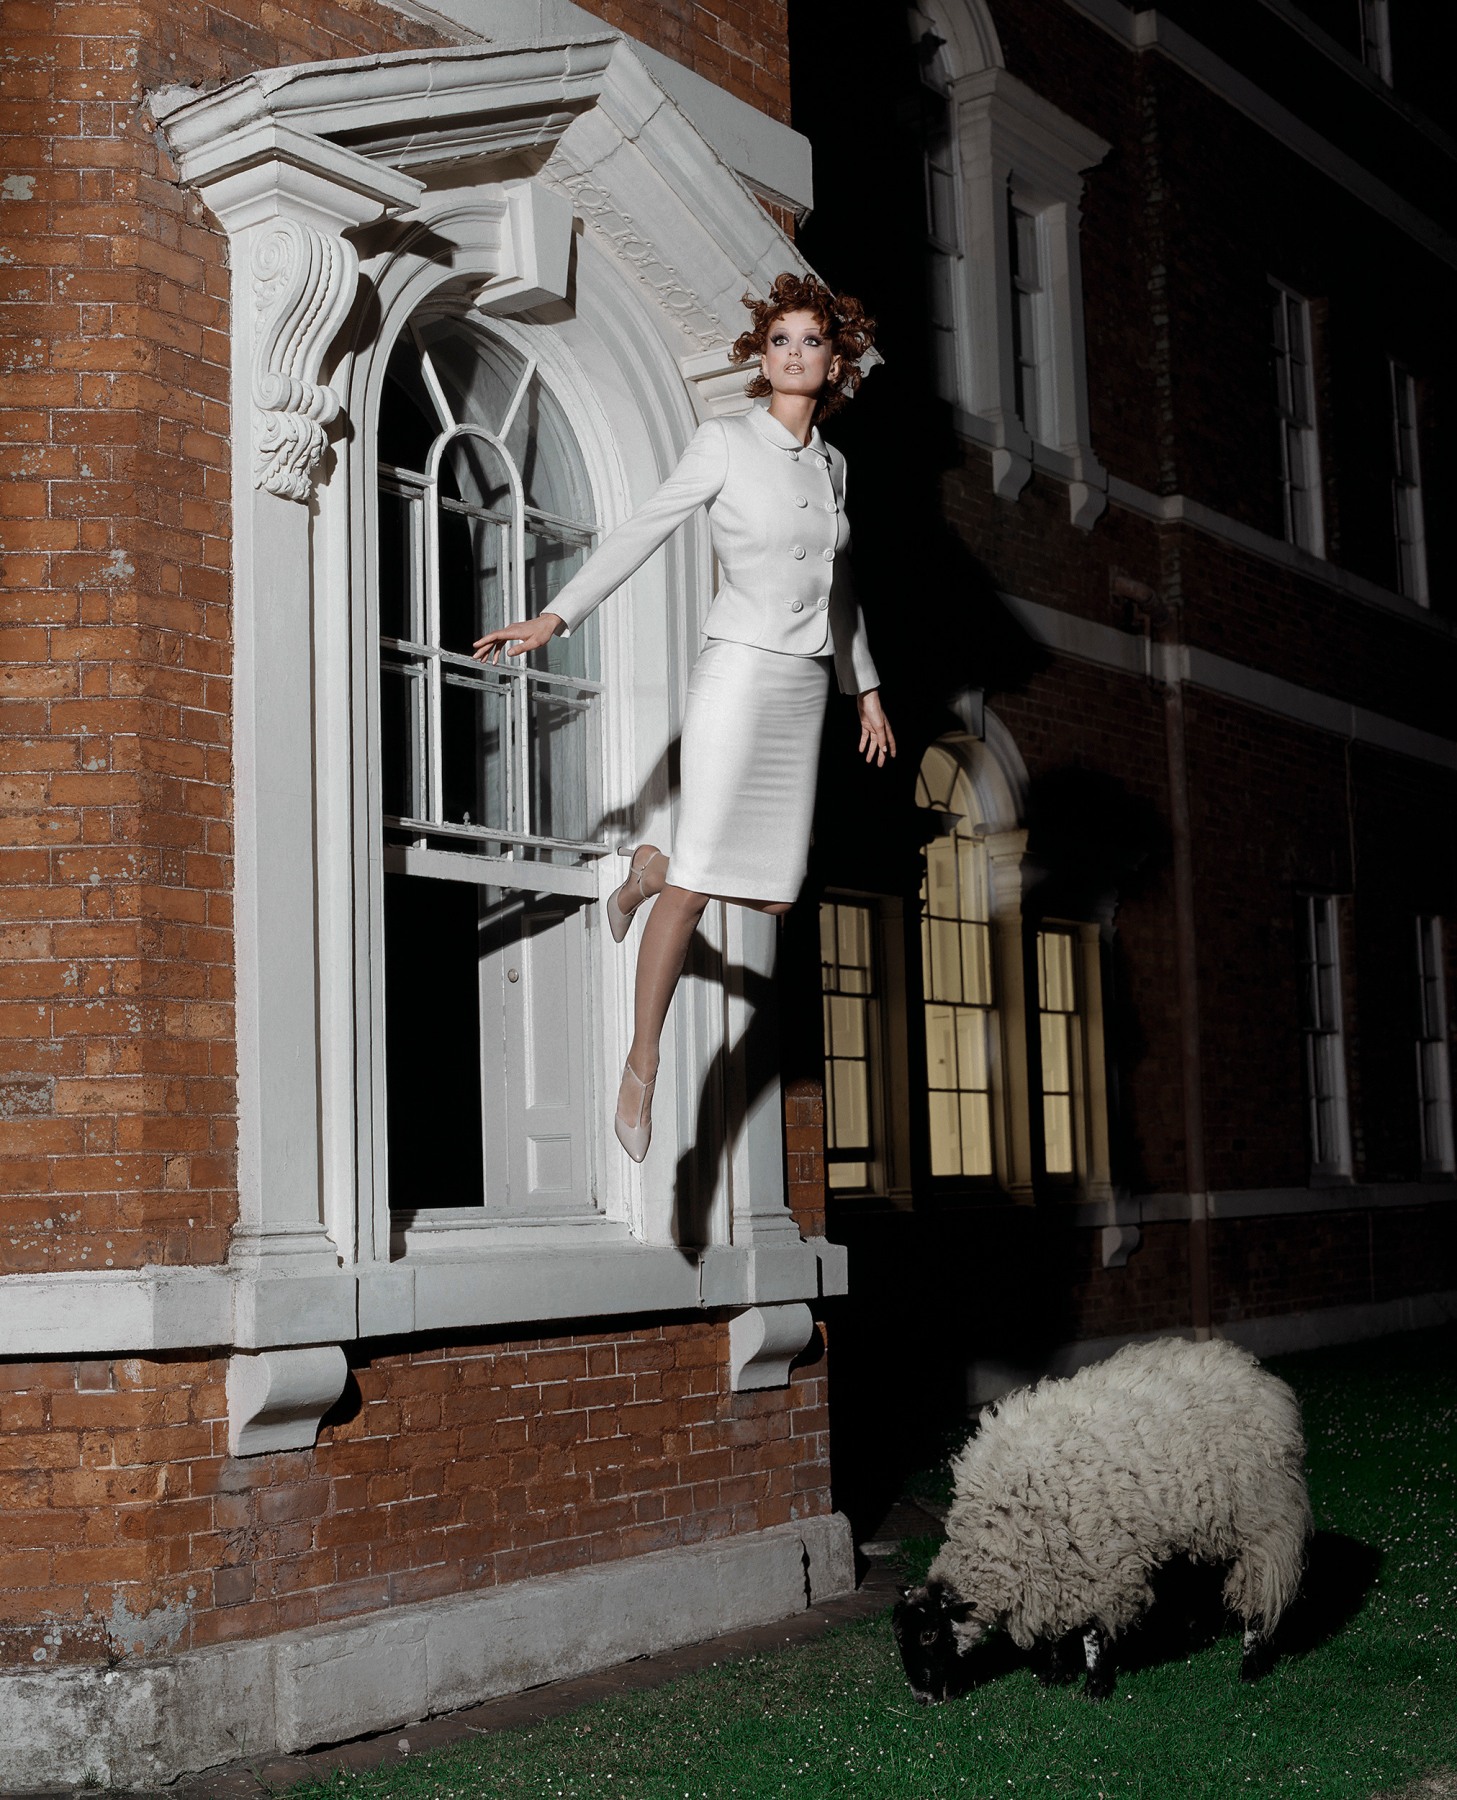 Model Flying From Window, England, 1995, Archival Pigment Print